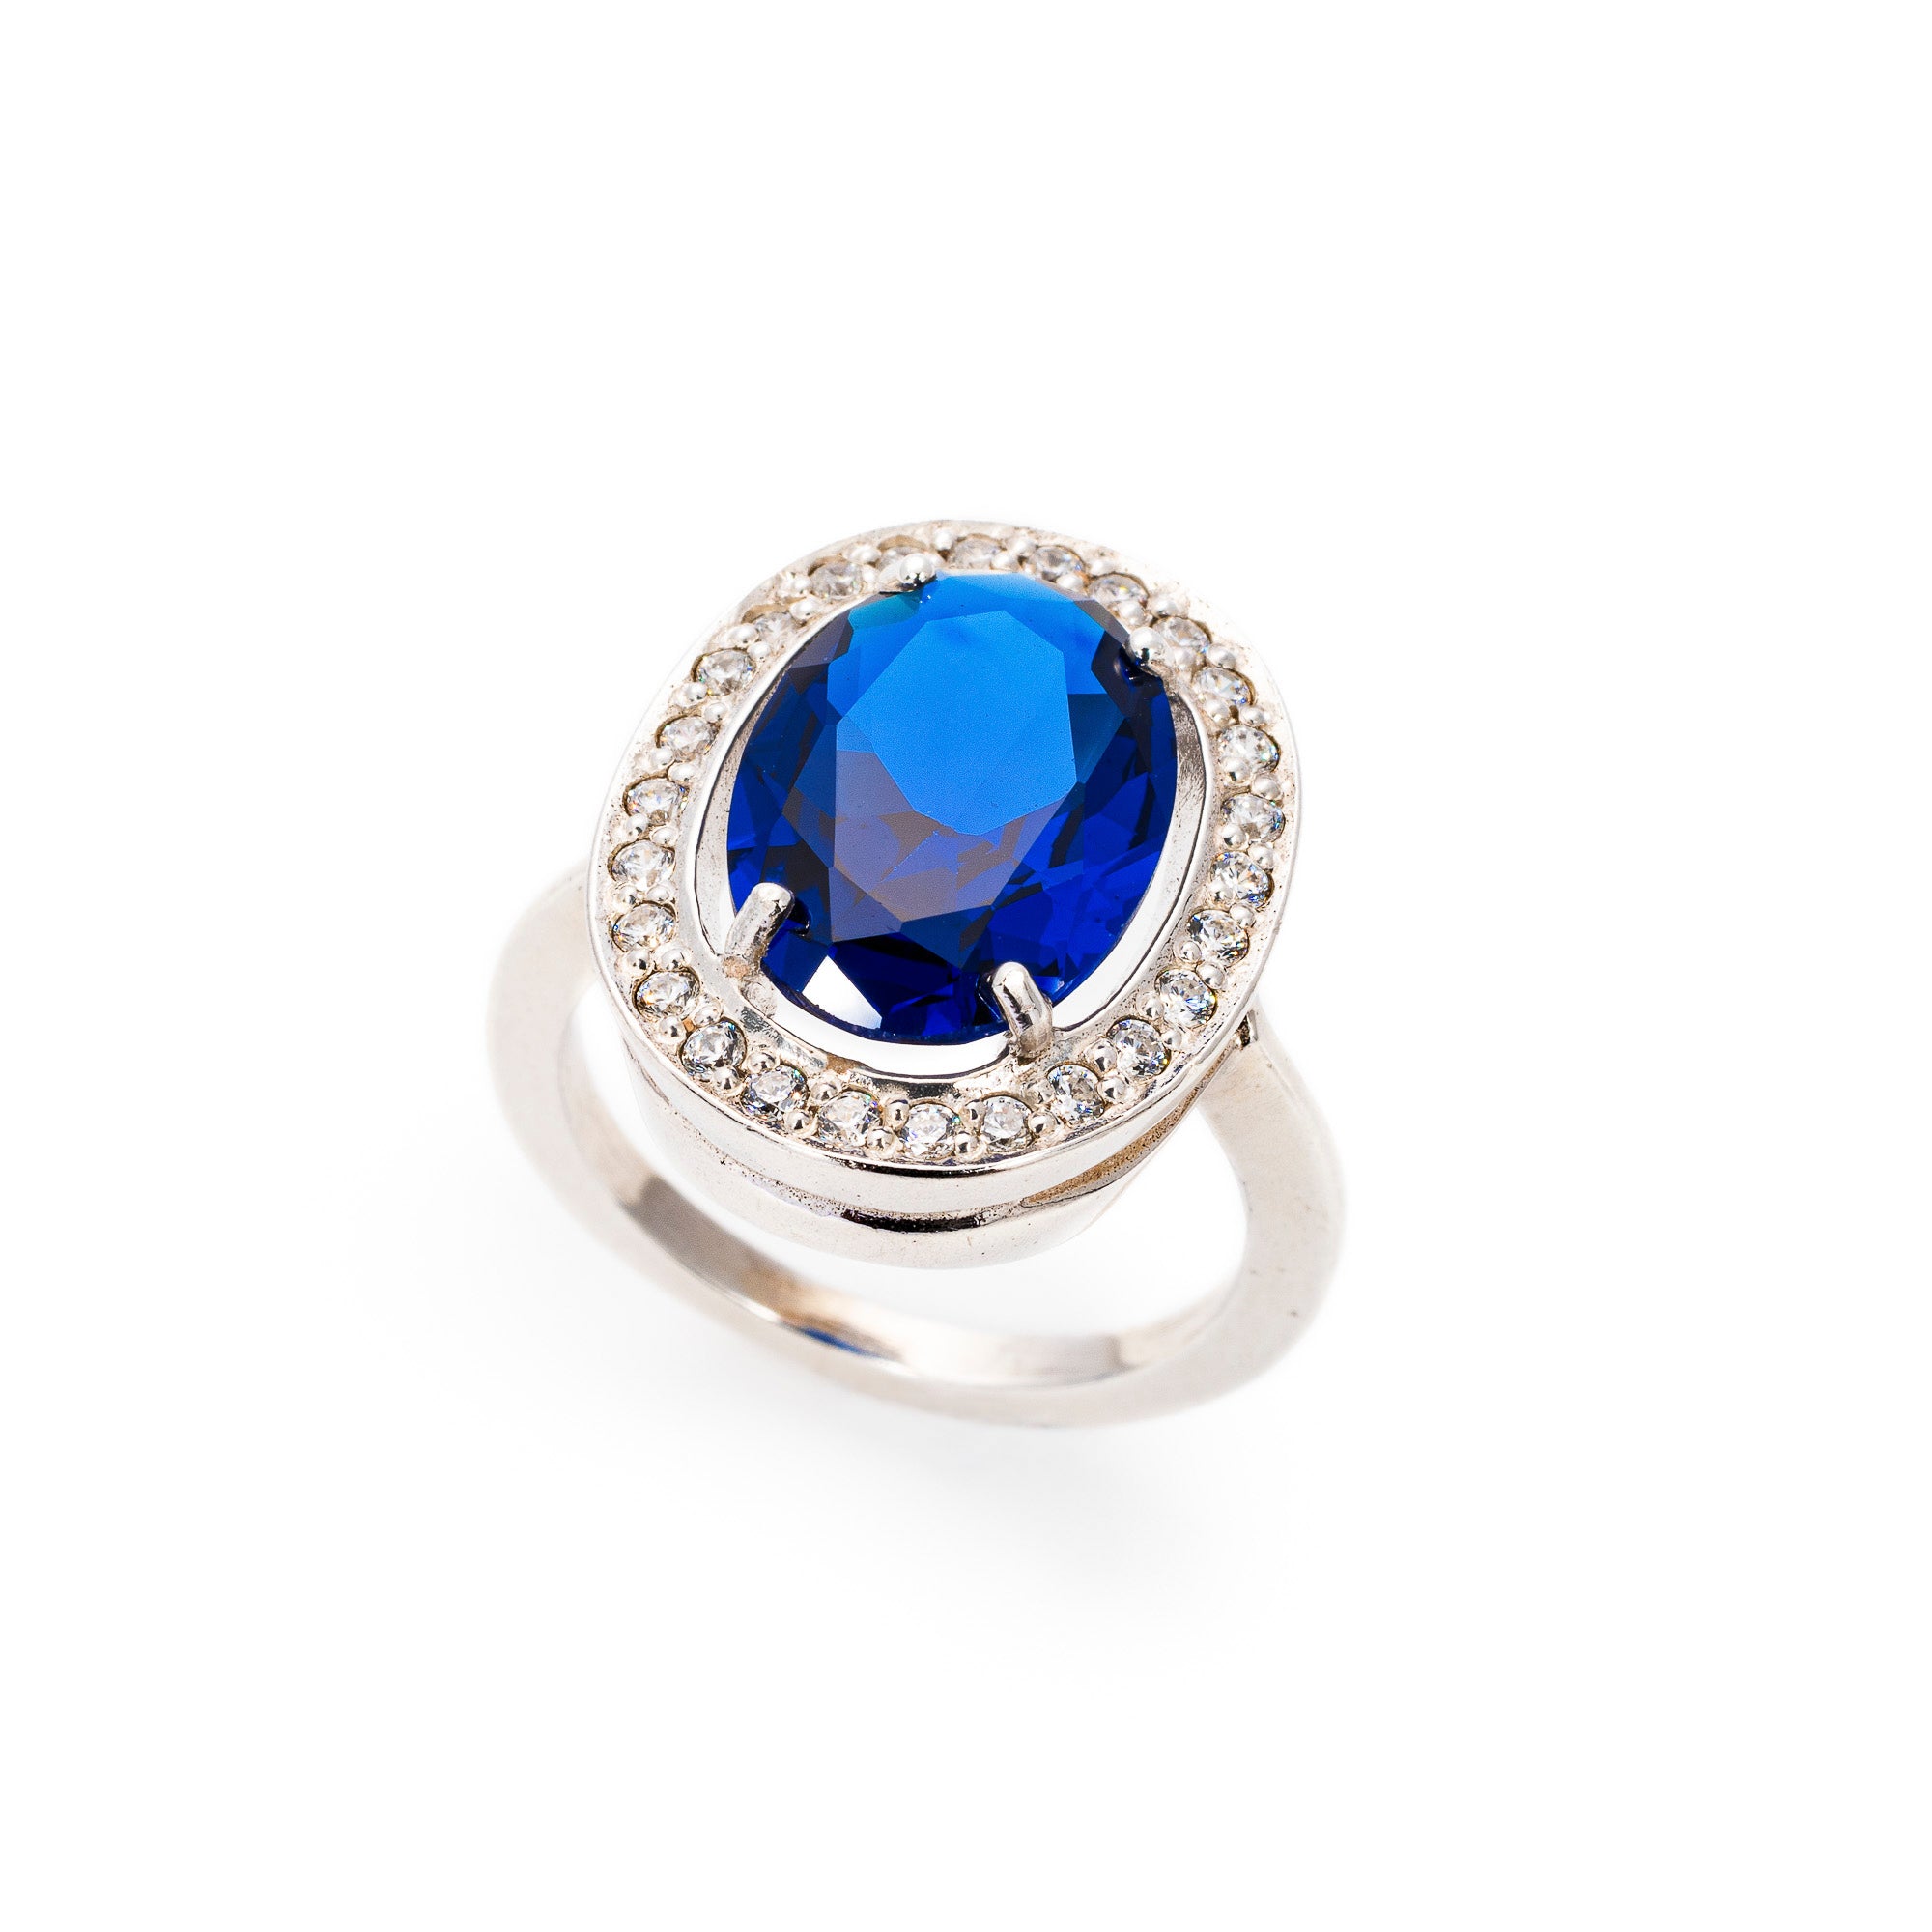 Royal Blue Ring, Sapphire Ring, Created Sapphire, Victorian Ring, Vintage Rings, Large Stone Ring, Blue Ring, Silver Ring, Sapphire